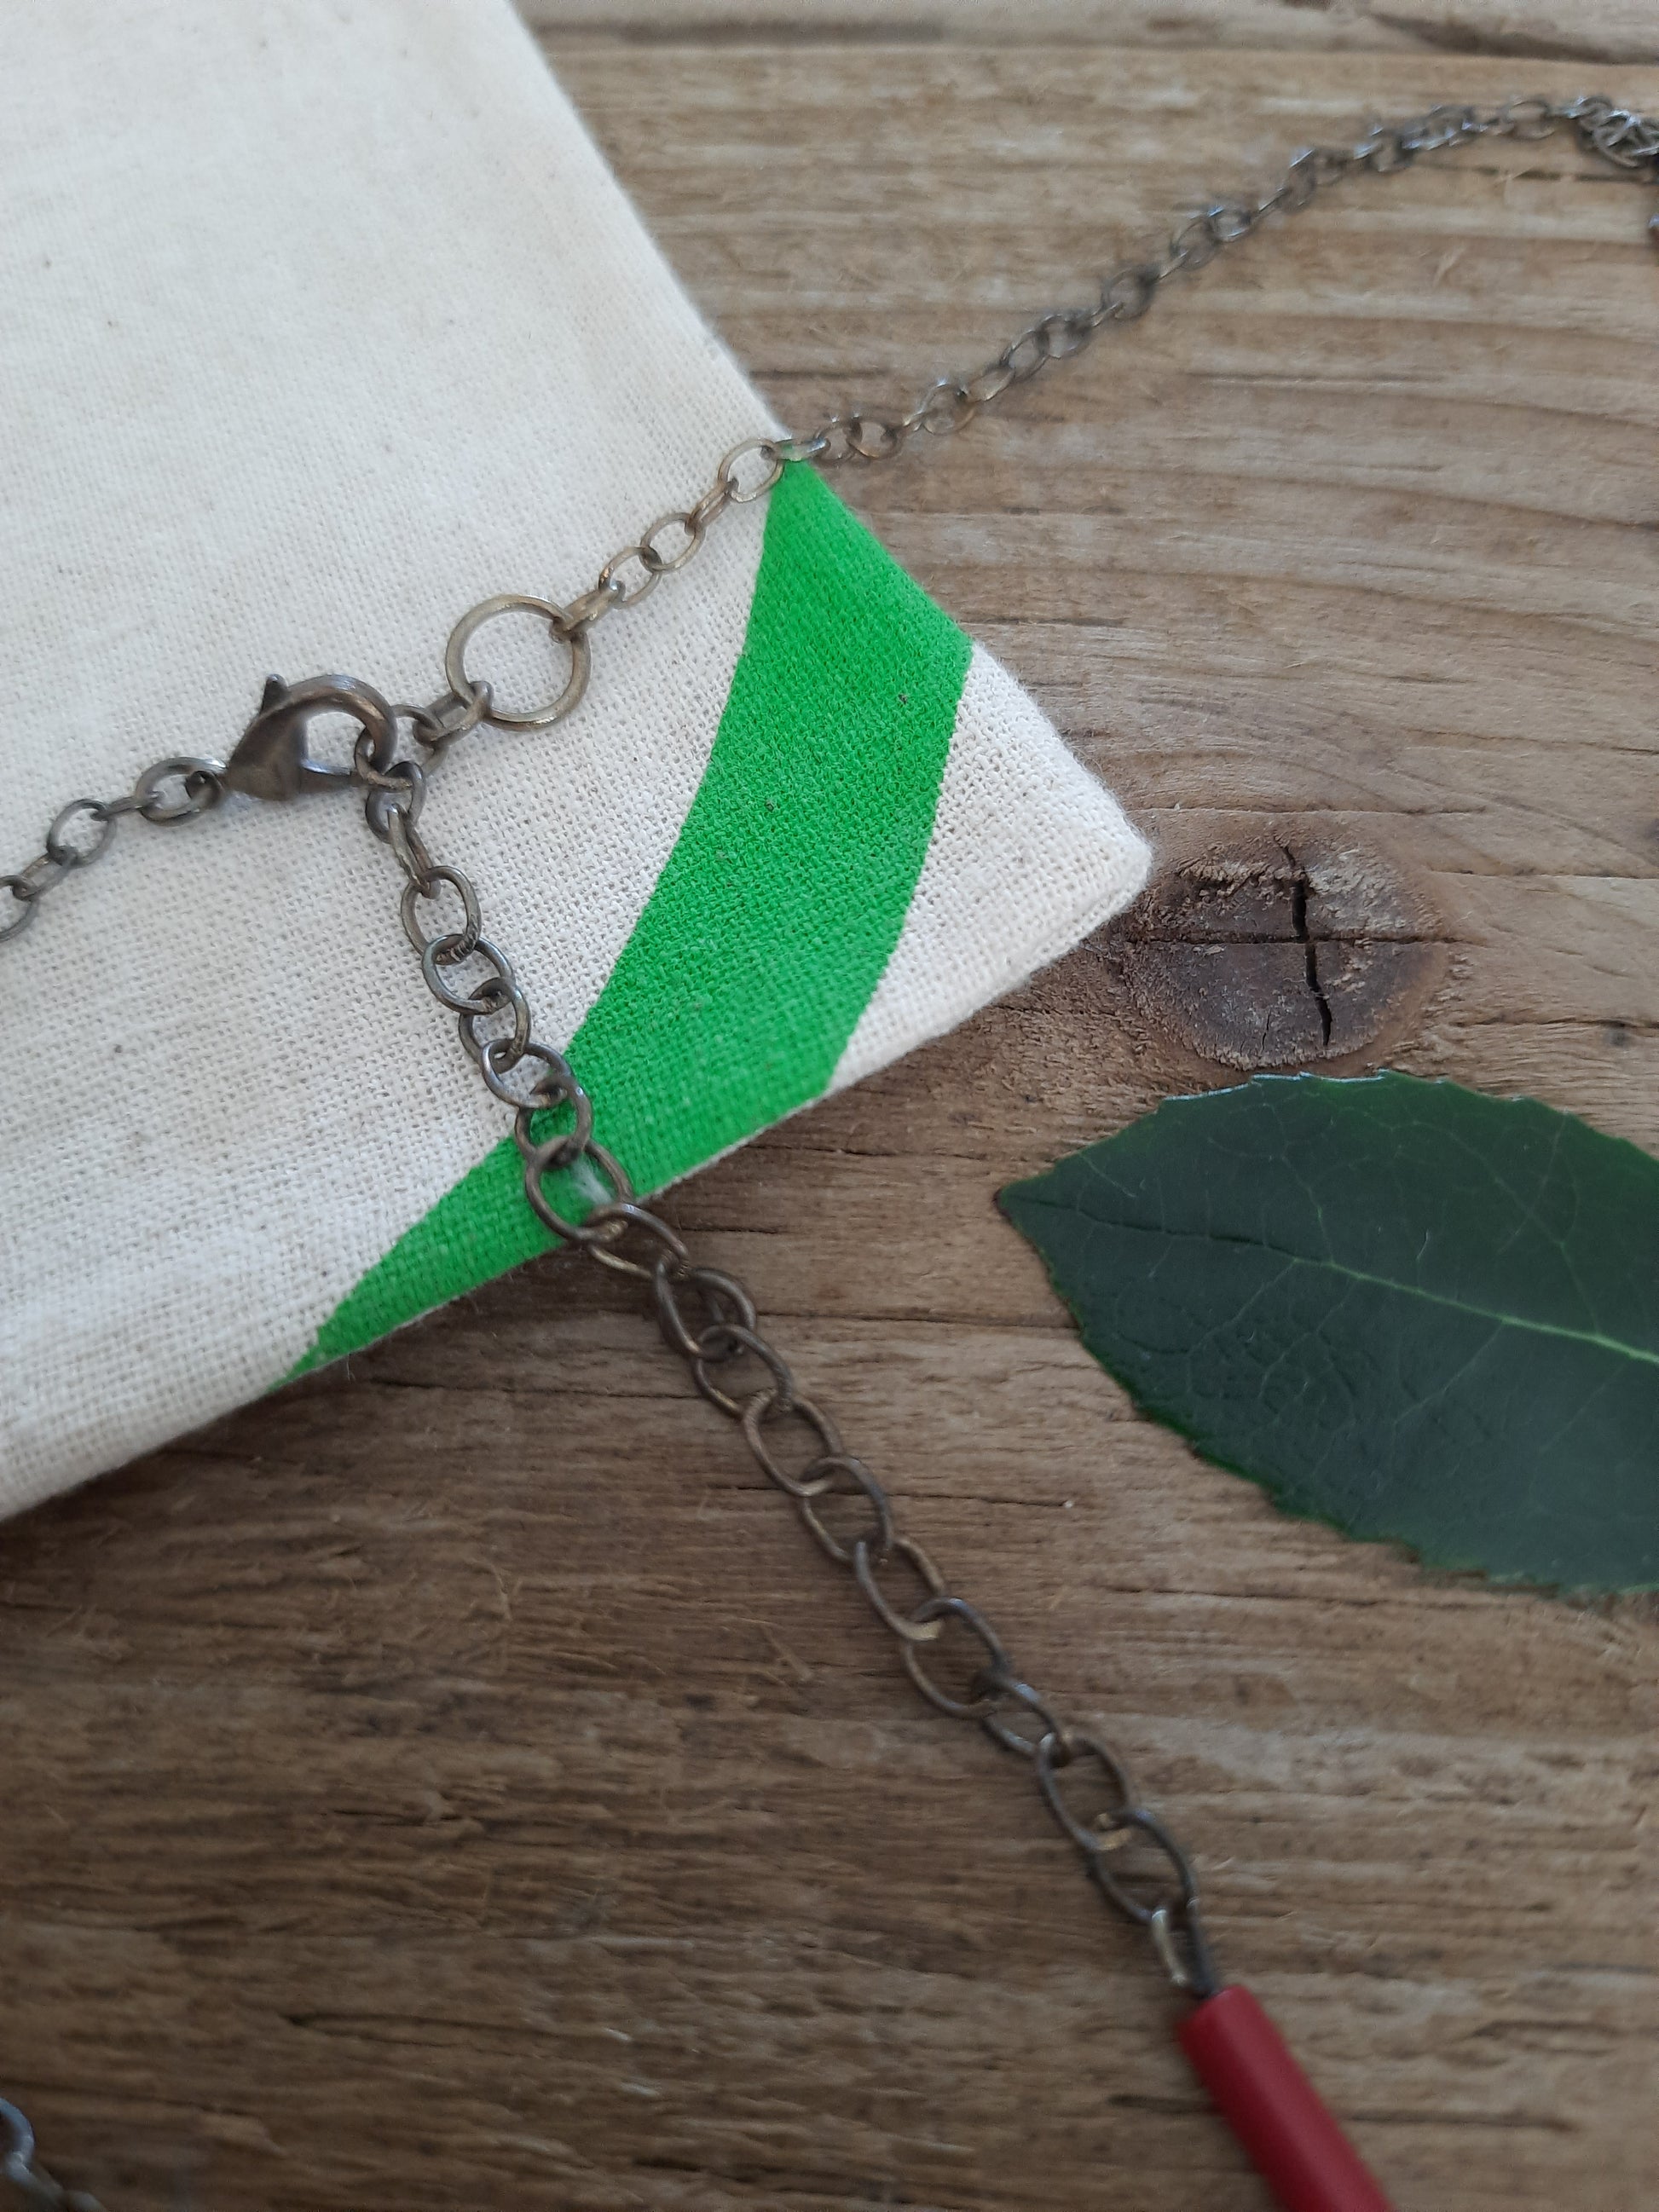 Fair Trade Necklaces, Jewellery, Eco Friendly Gifts UK, Sustainable Gifts For Her, Ethical Gifts UK, The Fair Trade, BIG GREEN APPLE